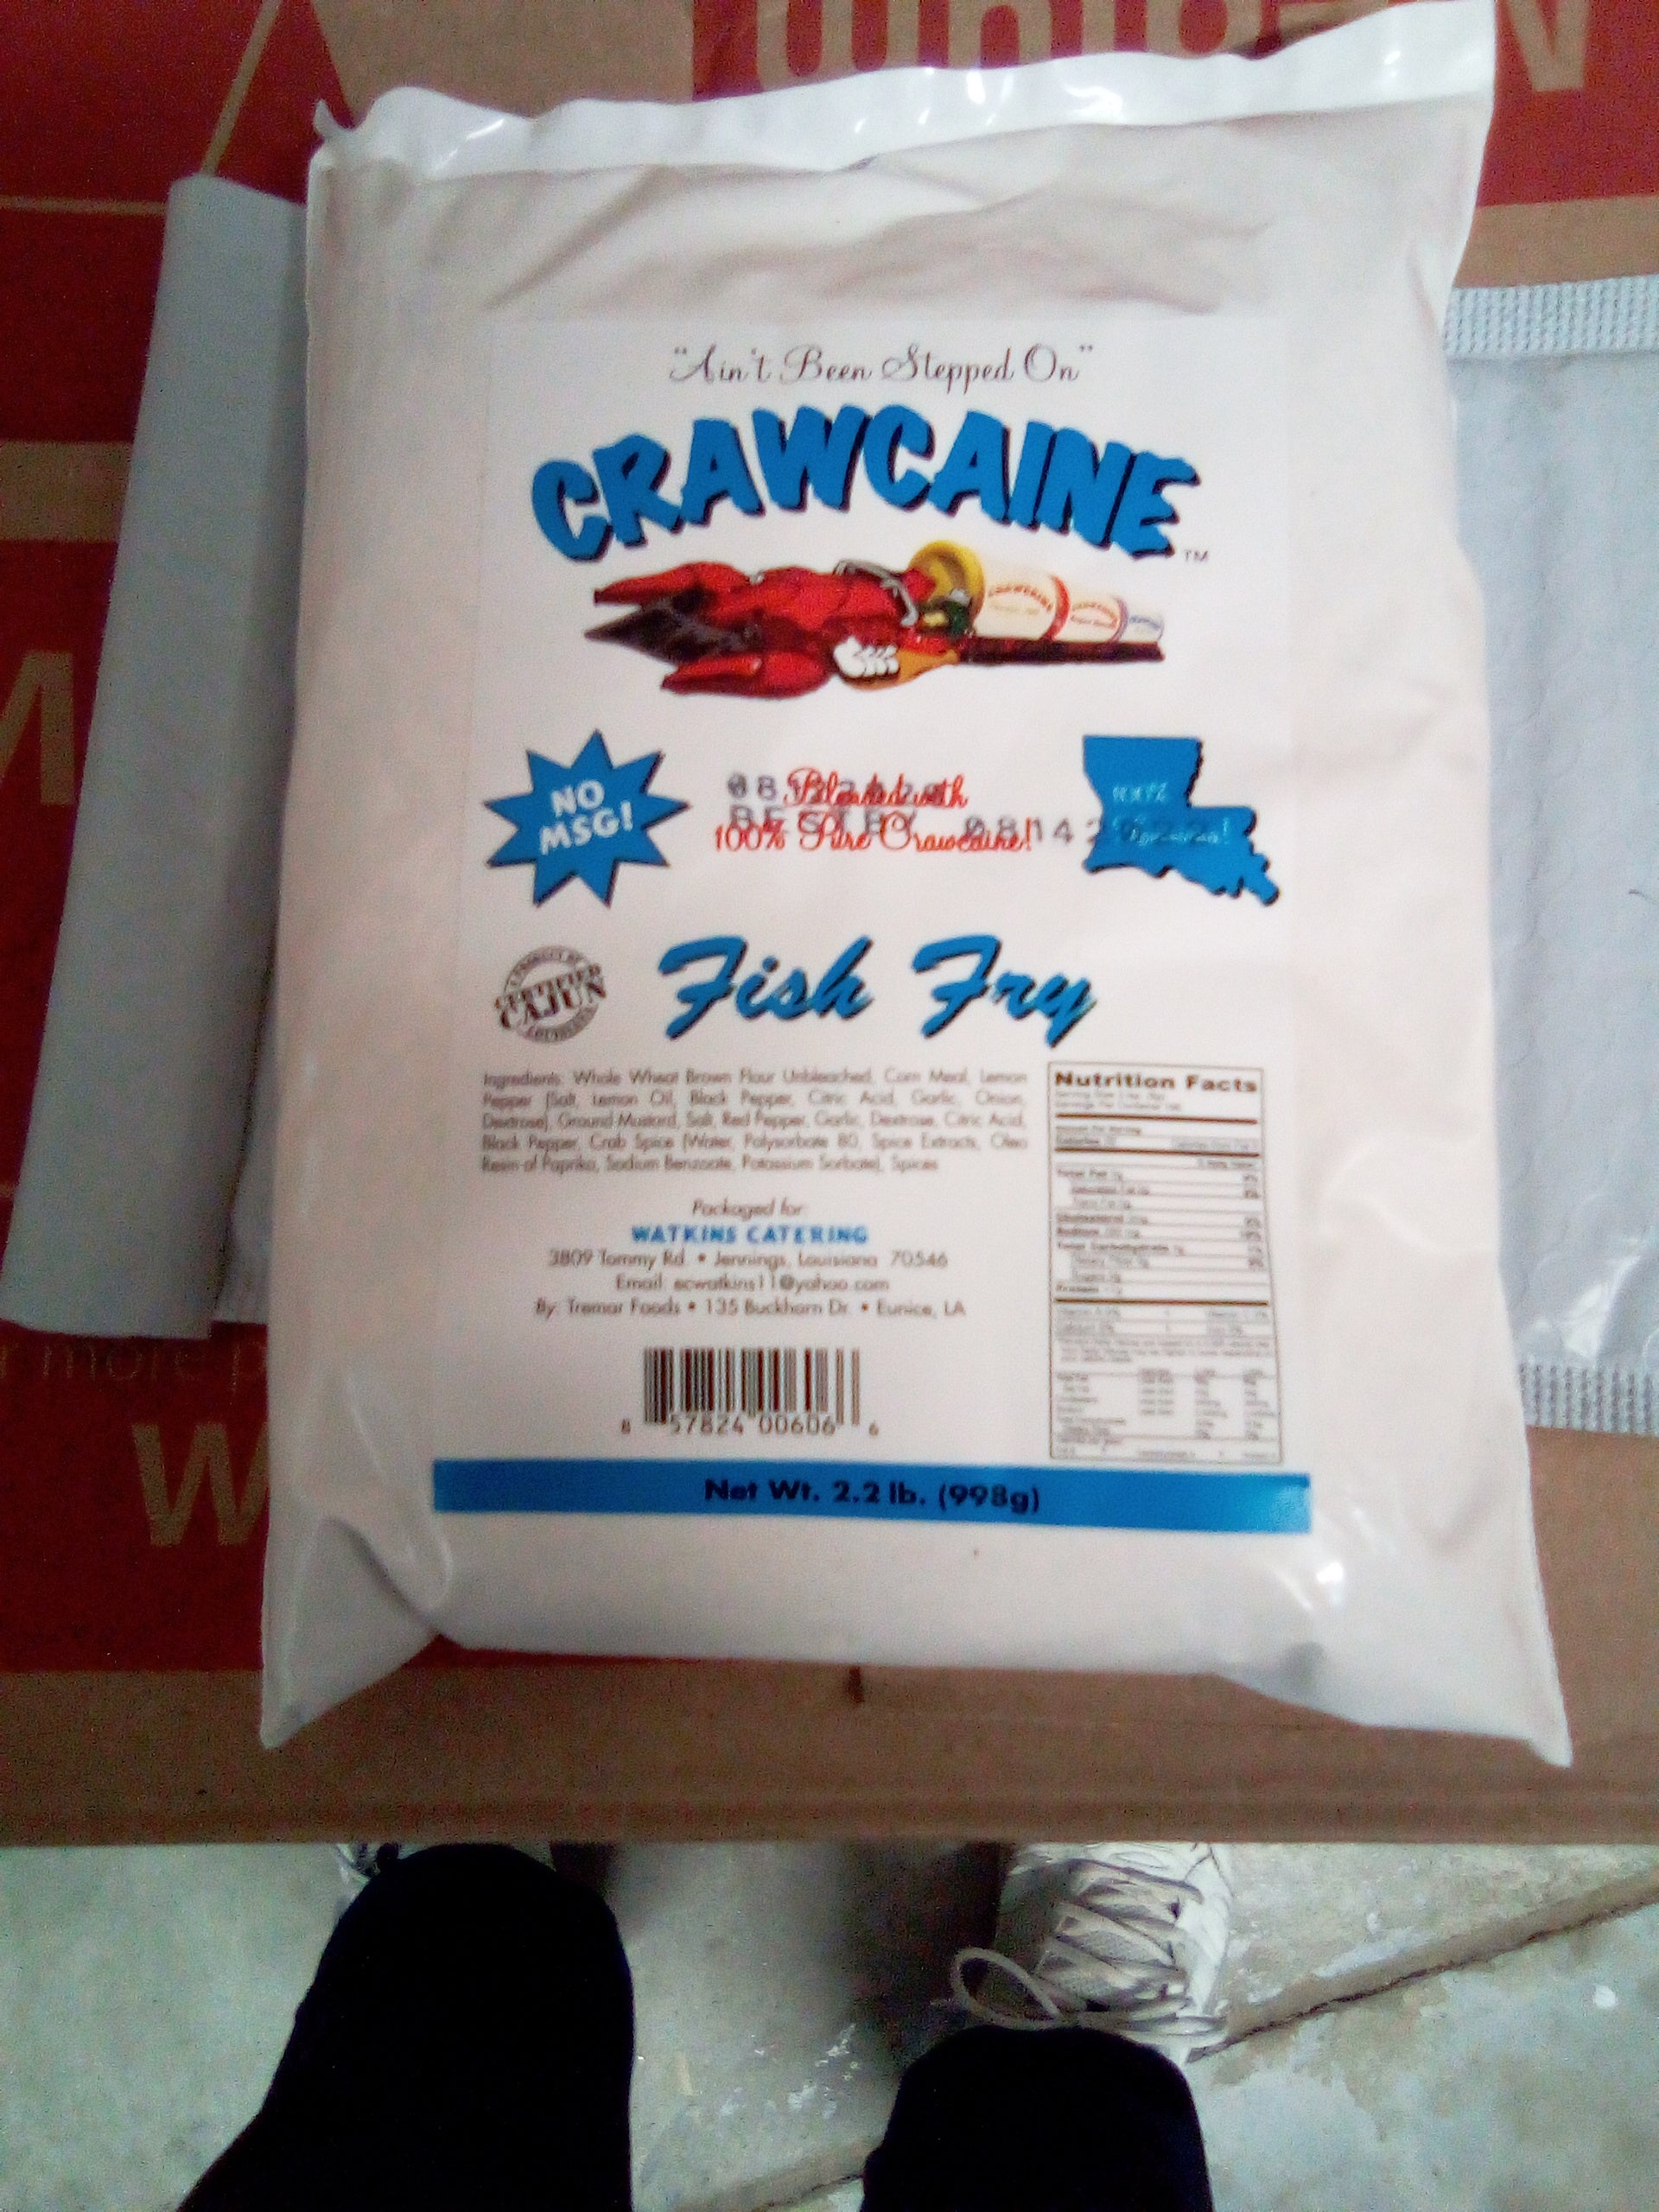 Crawcaine- Blended Fish Fry 2.2lbs. 8-5782400606-6